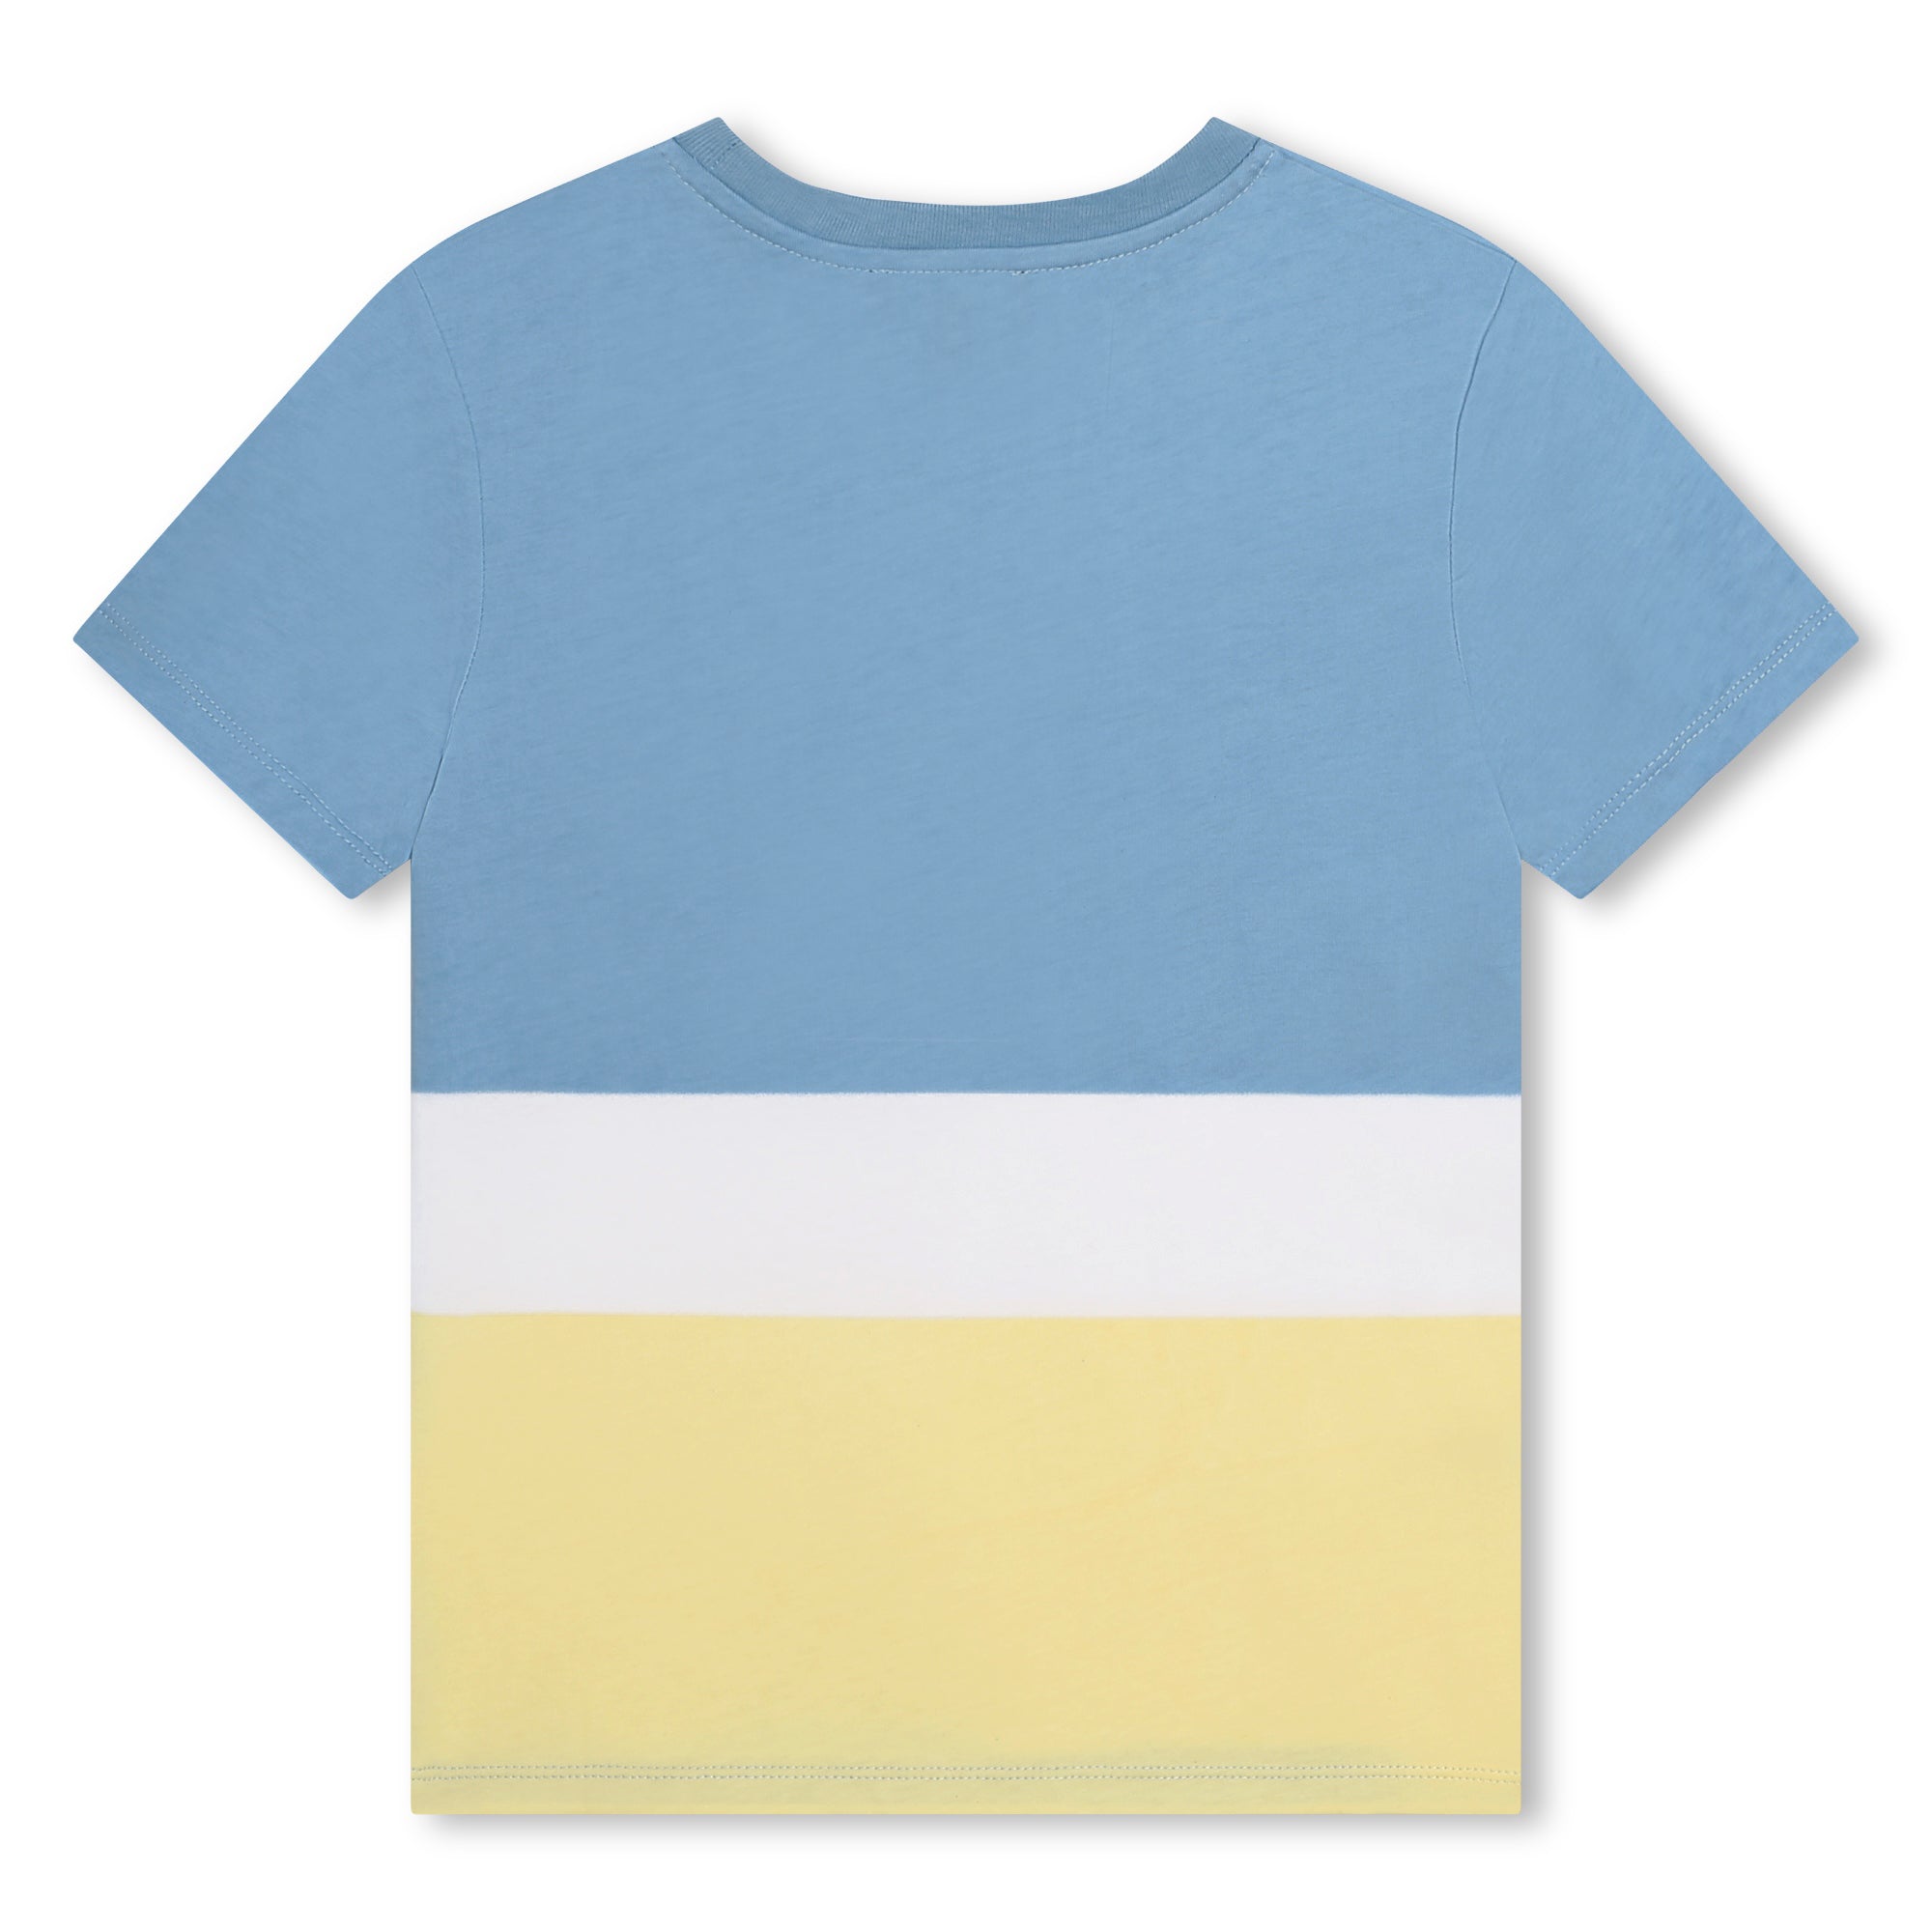 DKNY Pale Blue and Yellow Logo Tee Shirt